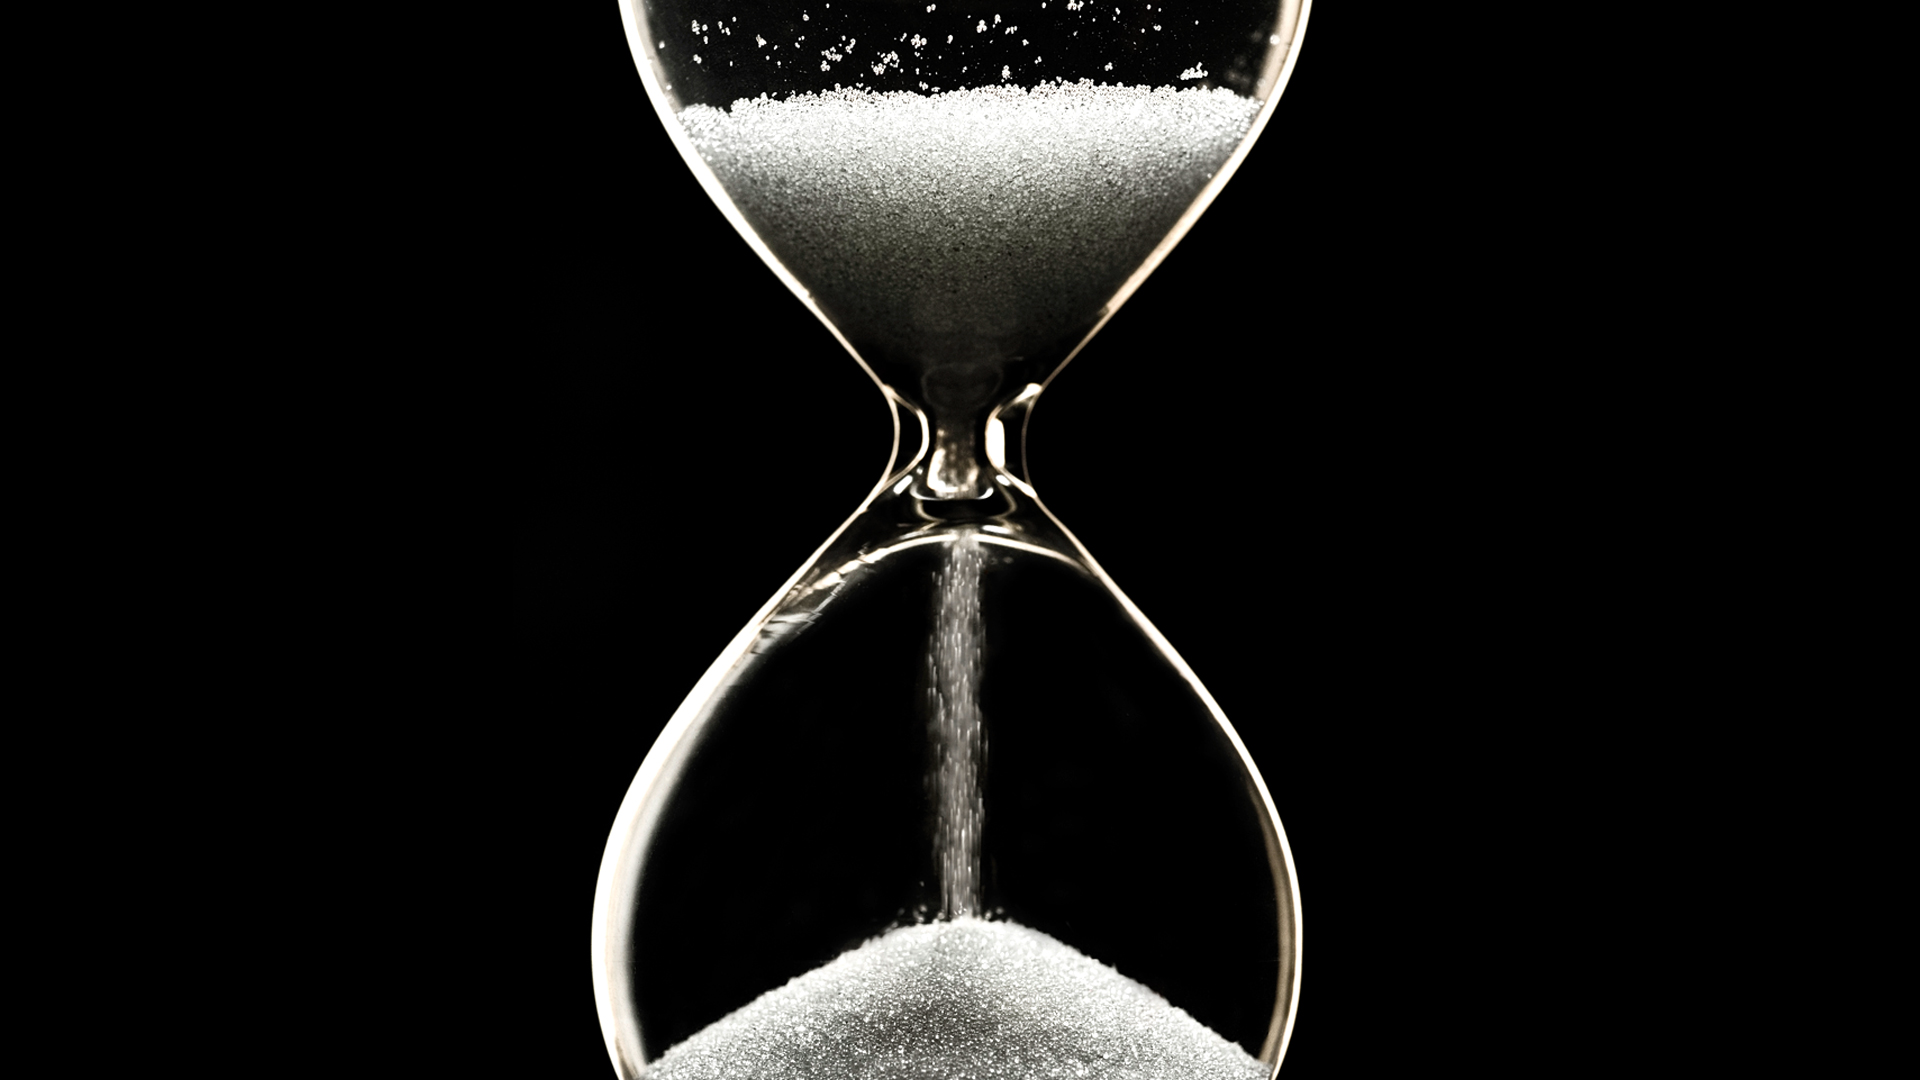 Is Your Time Running Out? – Daniel Tompsett